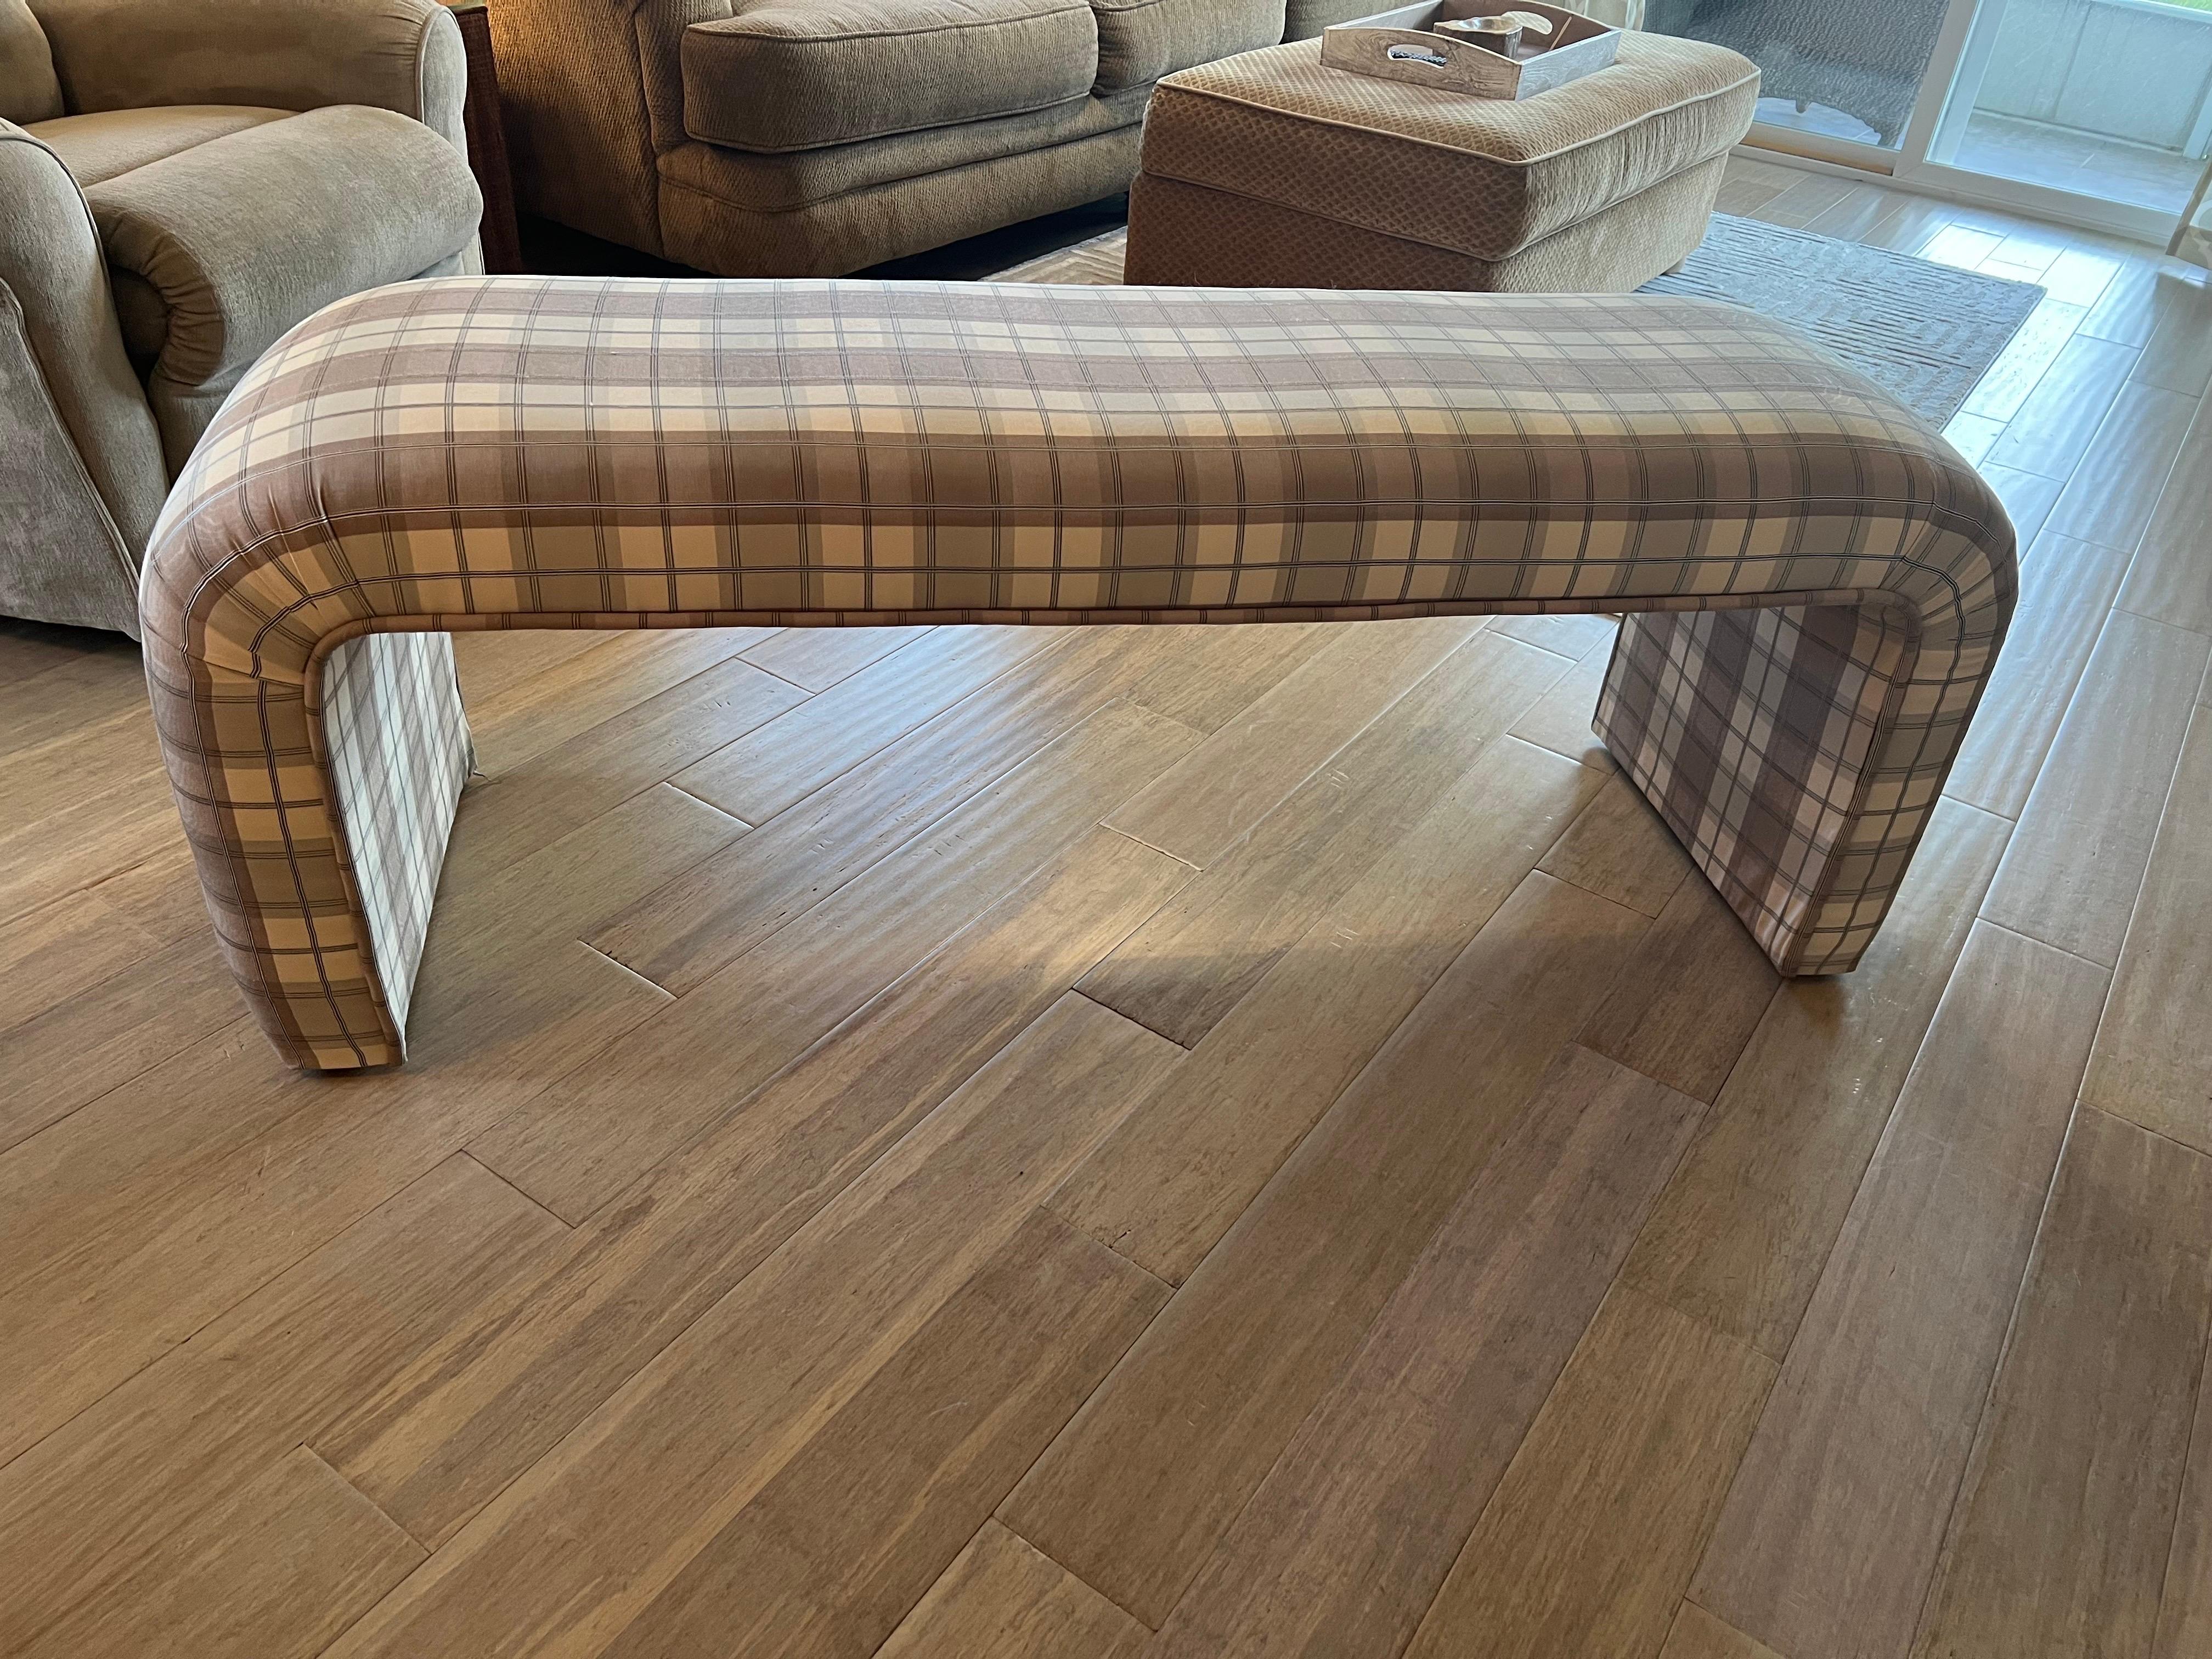 Upholstery Post Modern Waterfall Bench For Sale